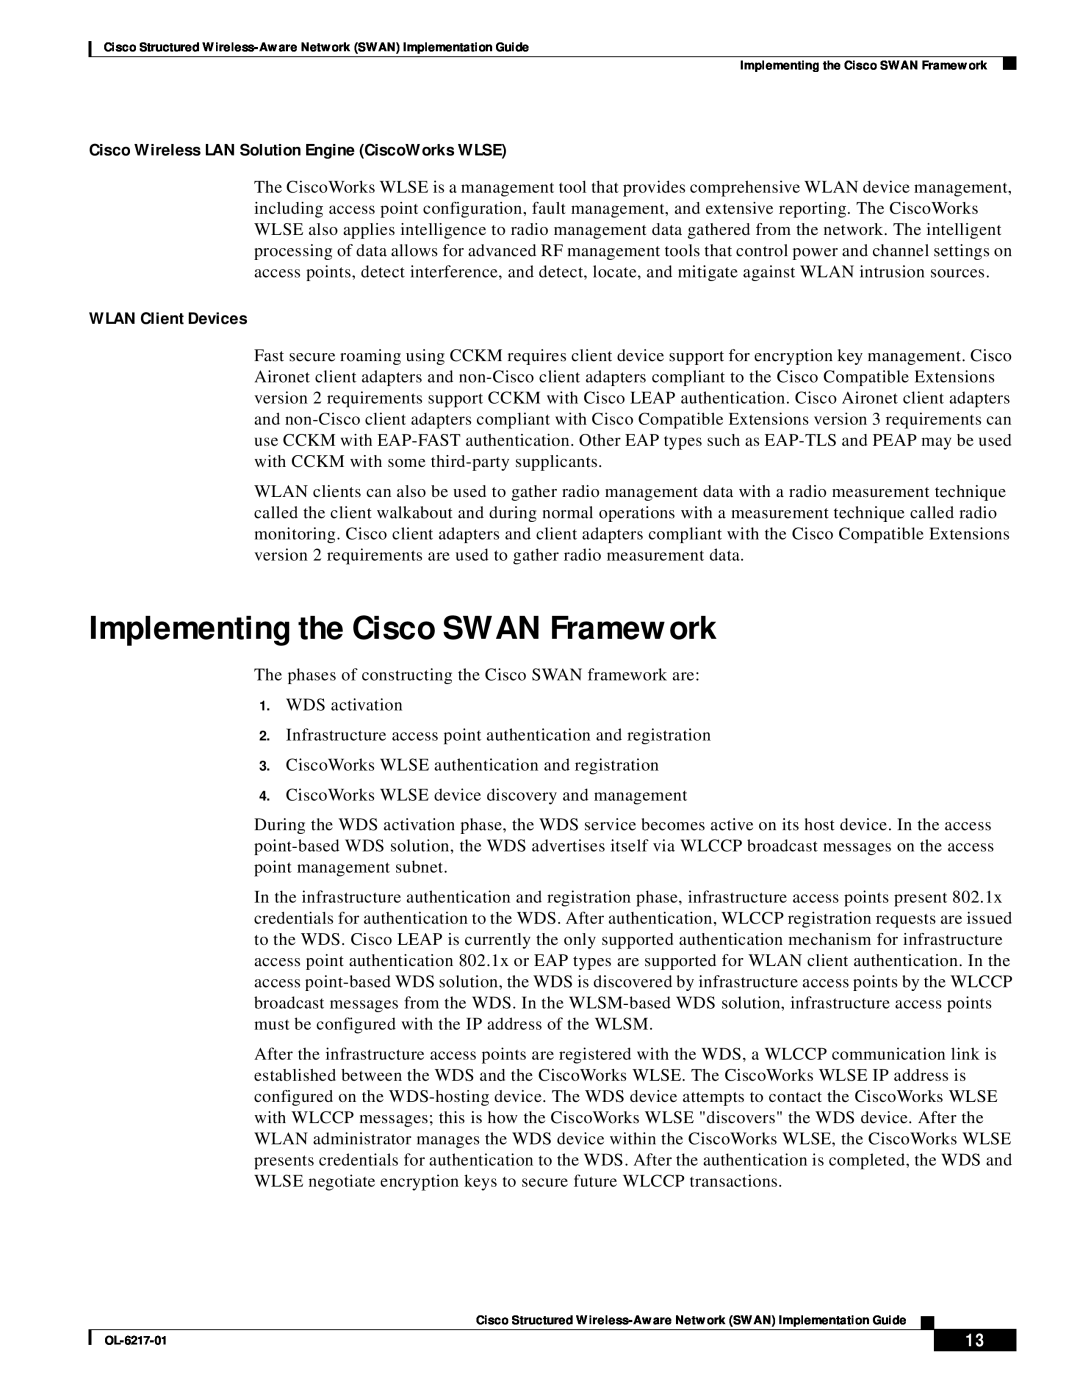 Cisco Systems OL-6217-01 manual Implementing the Cisco SWAN Framework, Cisco Wireless LAN Solution Engine CiscoWorks WLSE 